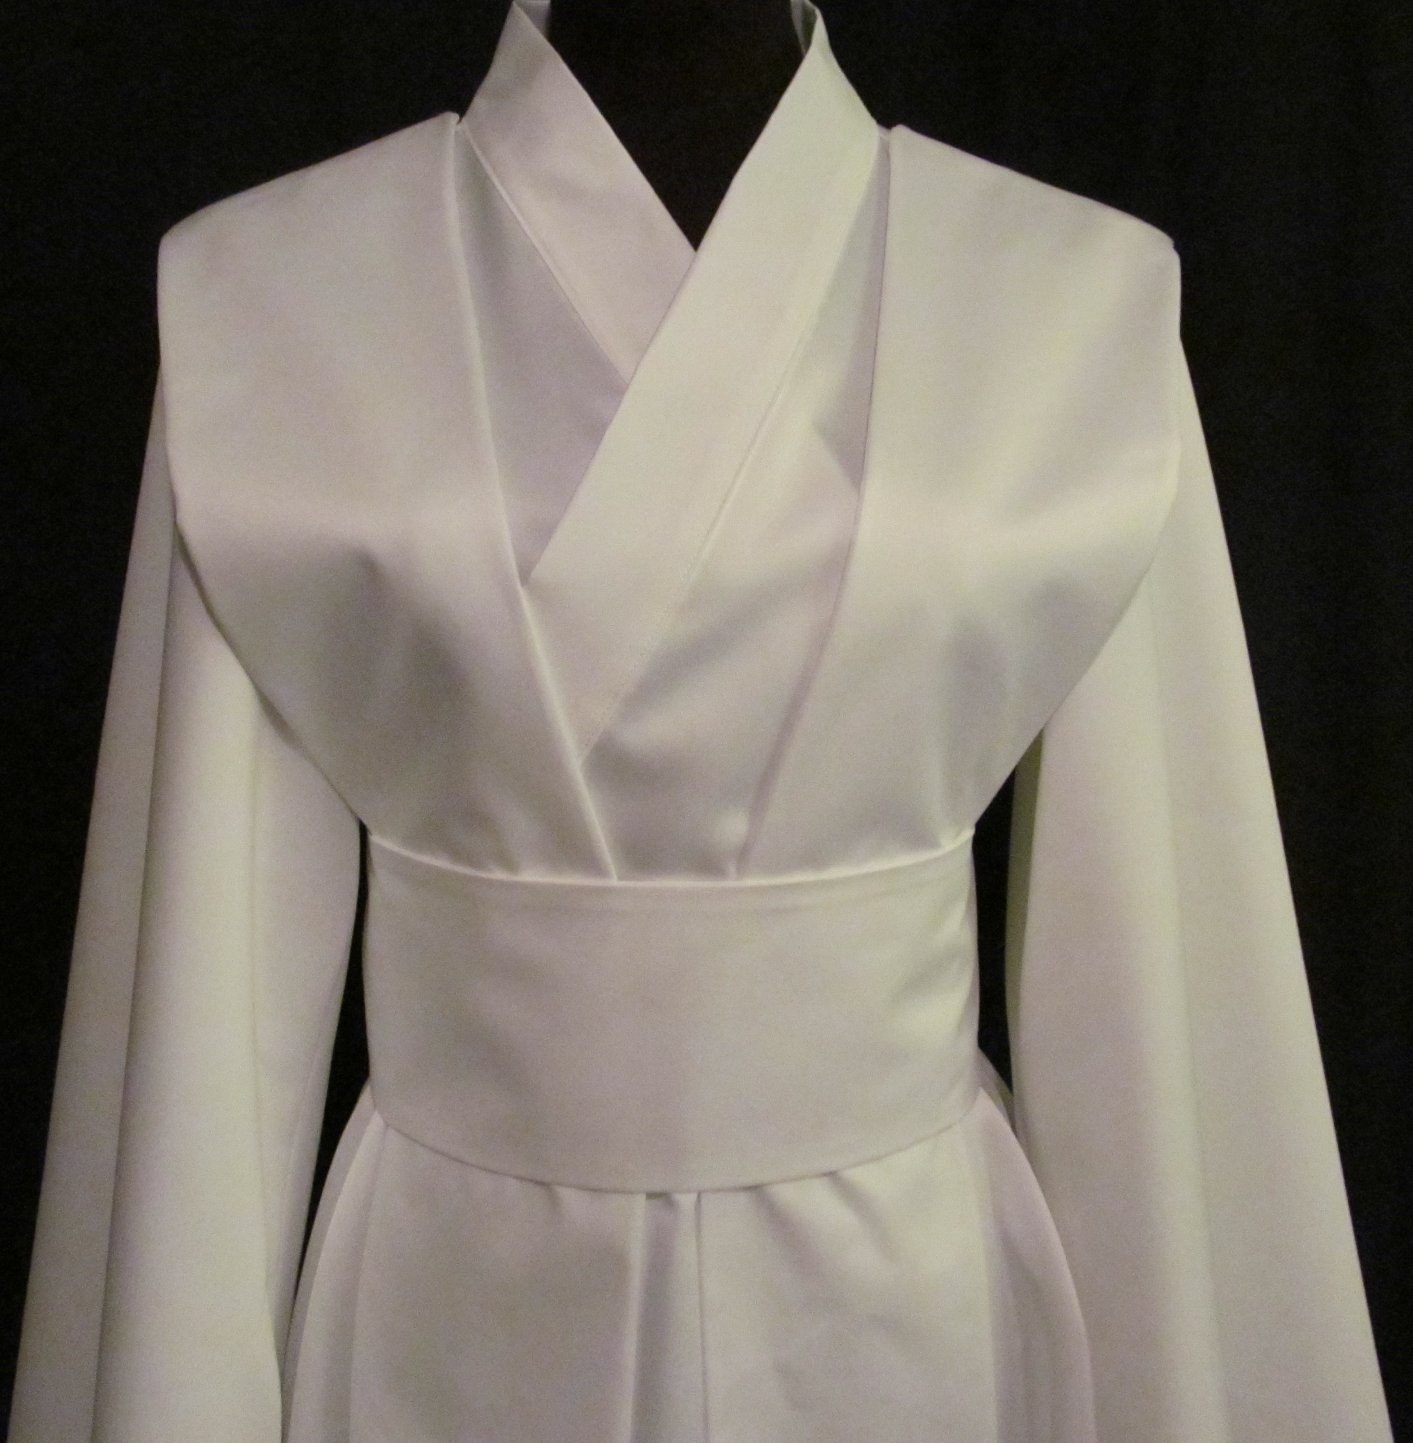 White Satin Kimono With Tabard and Obi Costume by AGypsyRed